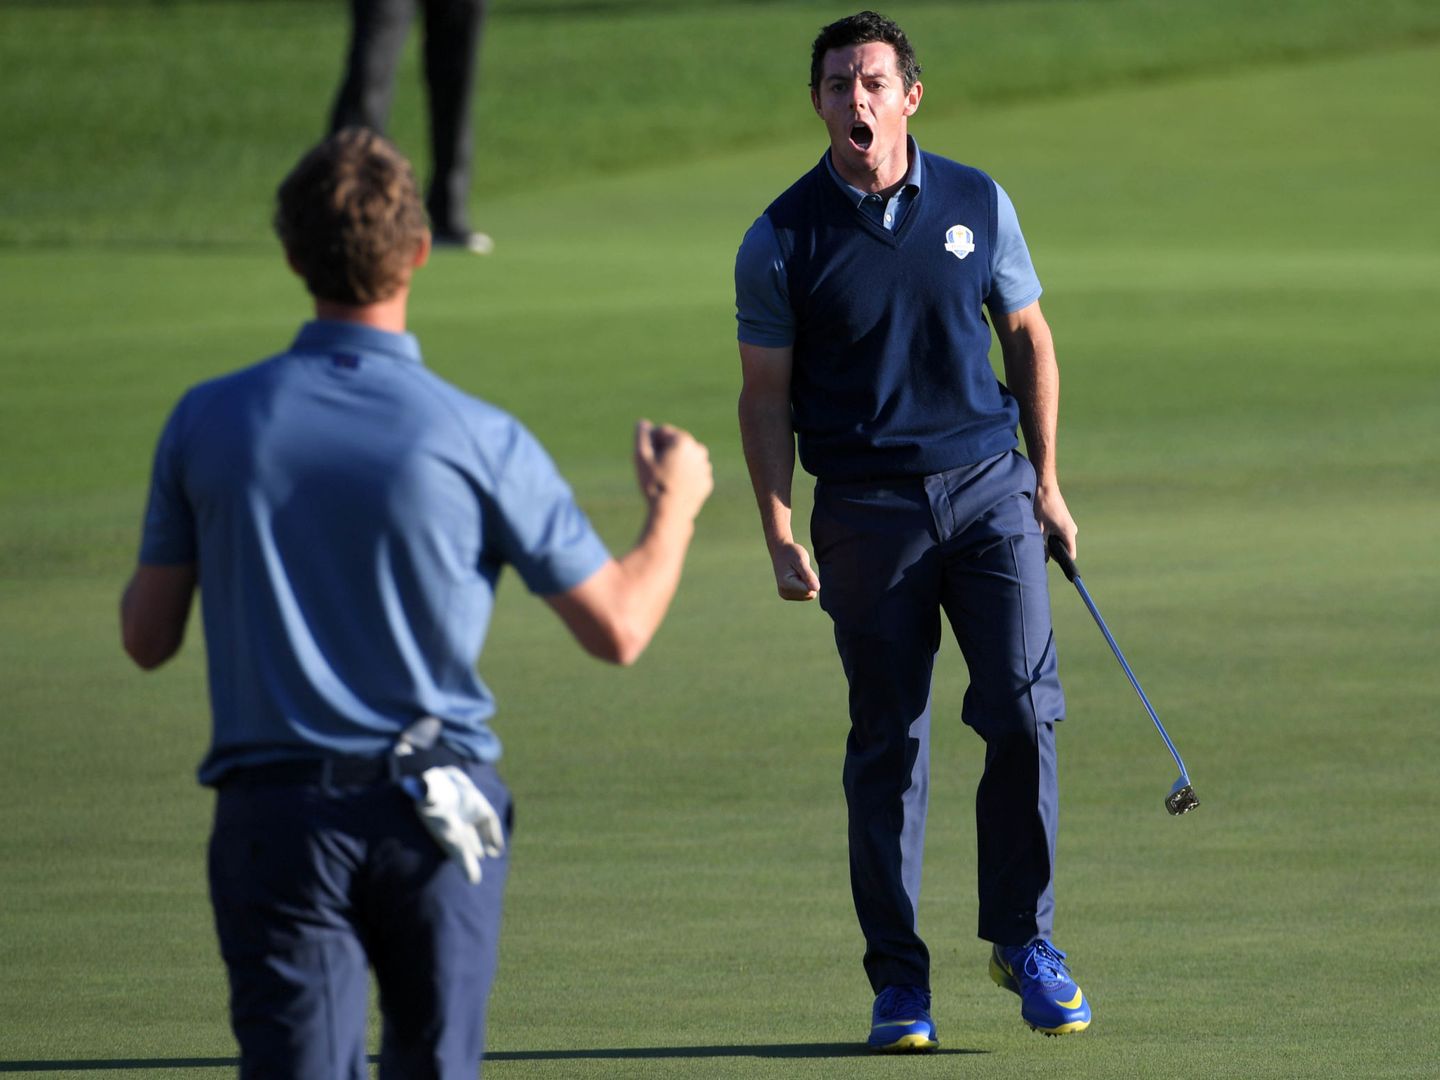 Rory McIlroy y Pieters le dieron el tercer punto a Europa (Michael Madrid/USA TODAY Sports)